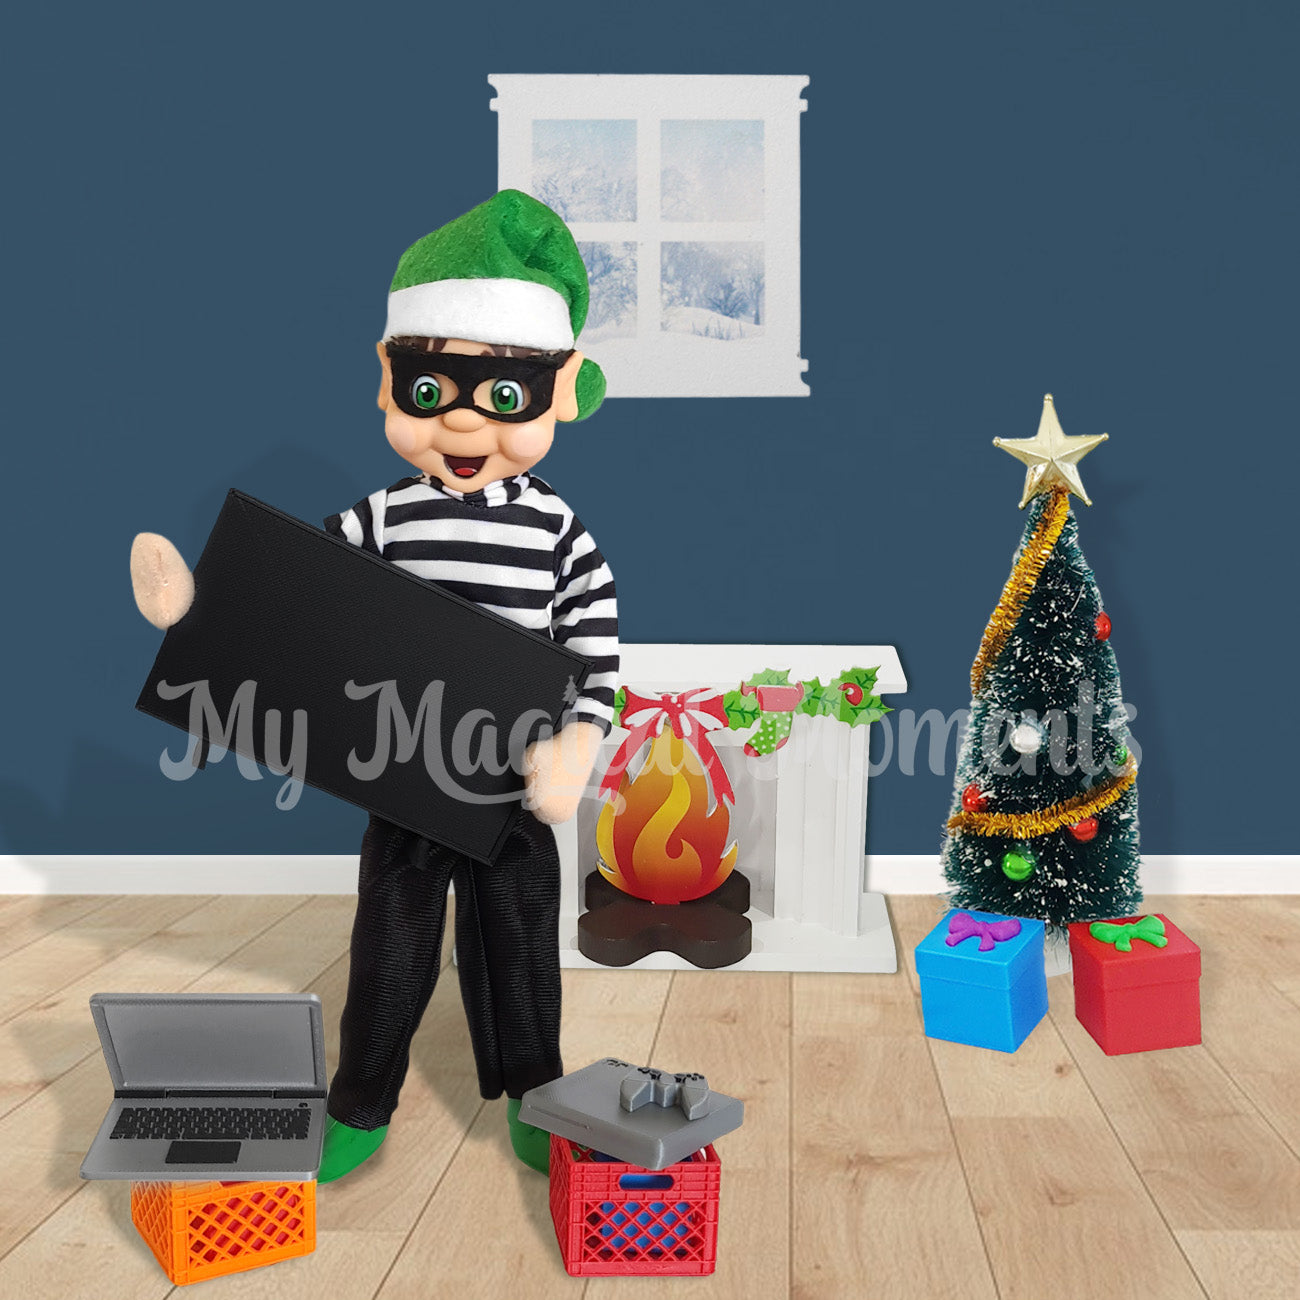 An elf dressed as a burglar, robbing a house. He is taking a tv, laptop, game console. There is a fireplace, presents and a Christmas tree behind him